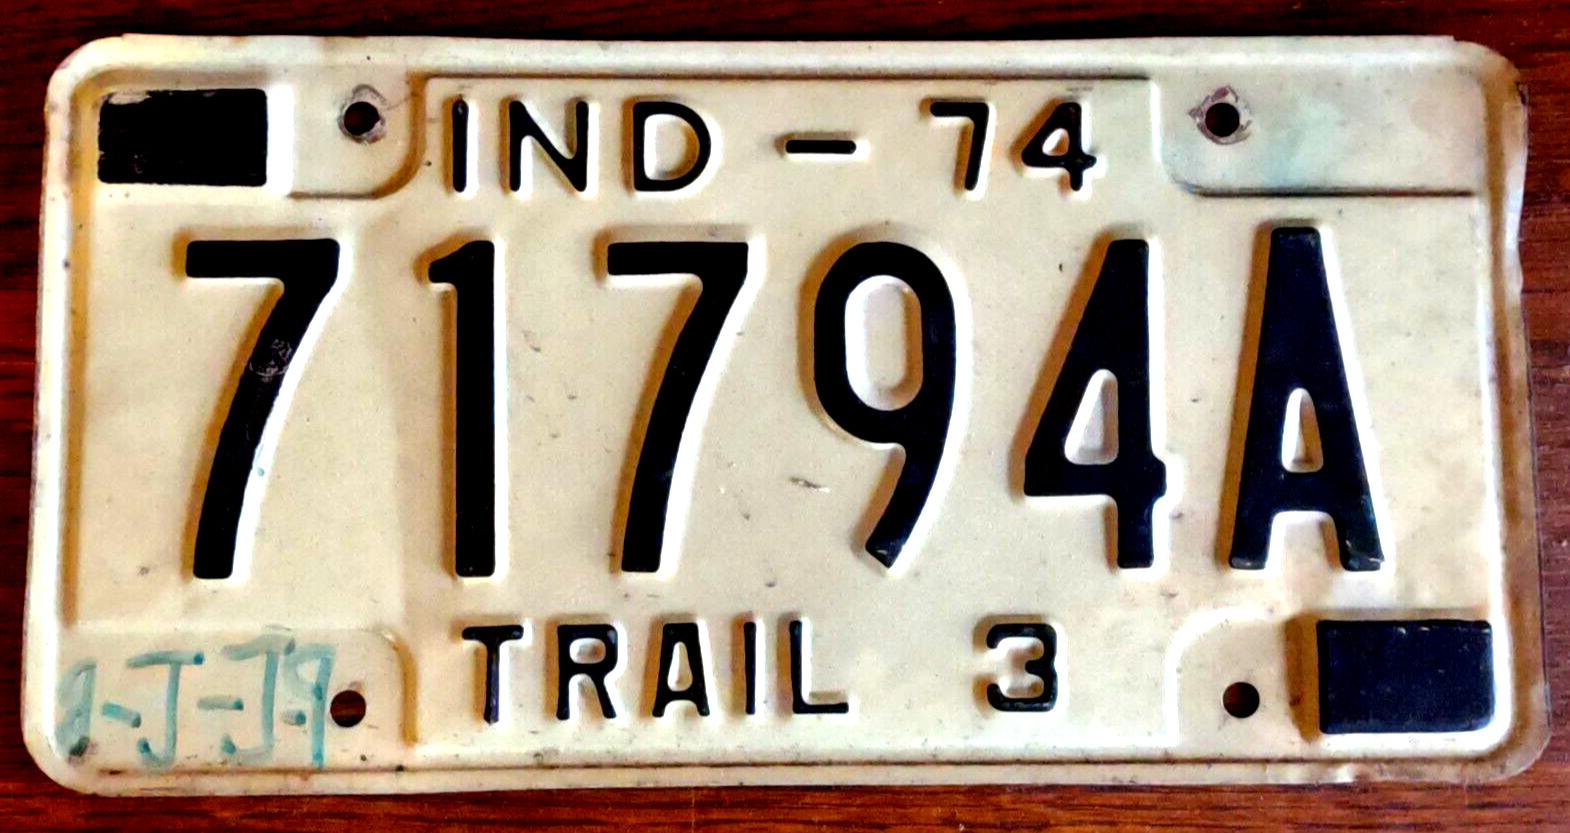 Indiana 1974 Black White Metal Expire License Plate Tag 71794A Trail 3 Trailer